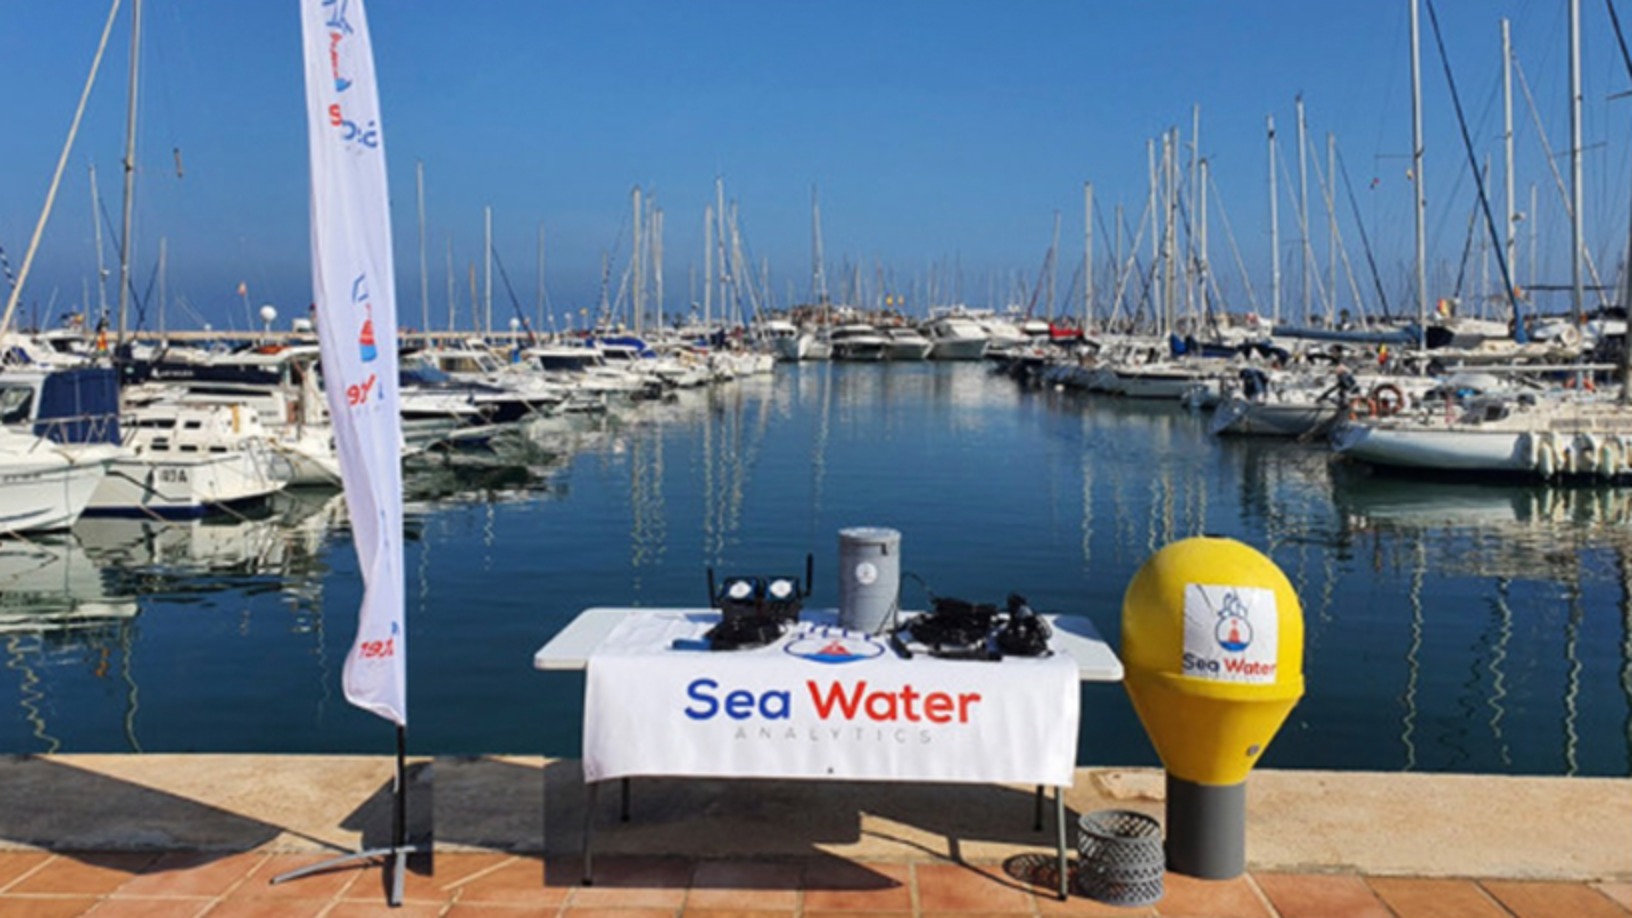 How Sea Water Analytics is using IoT to help keep beaches safe in Covid-19 era